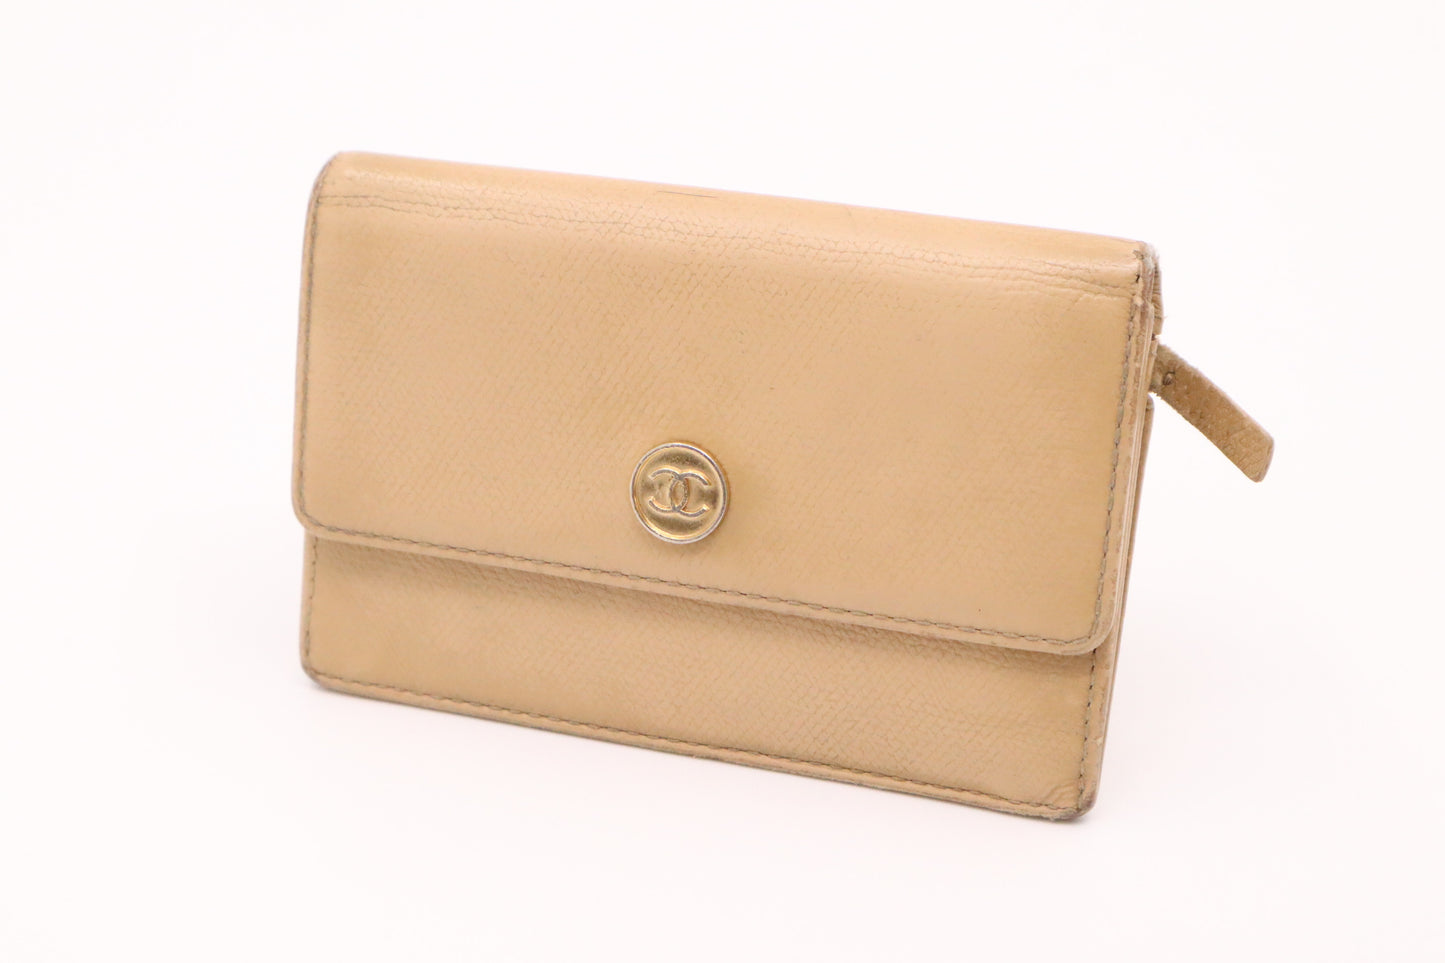 Chanel Coin Case in Beige Leather